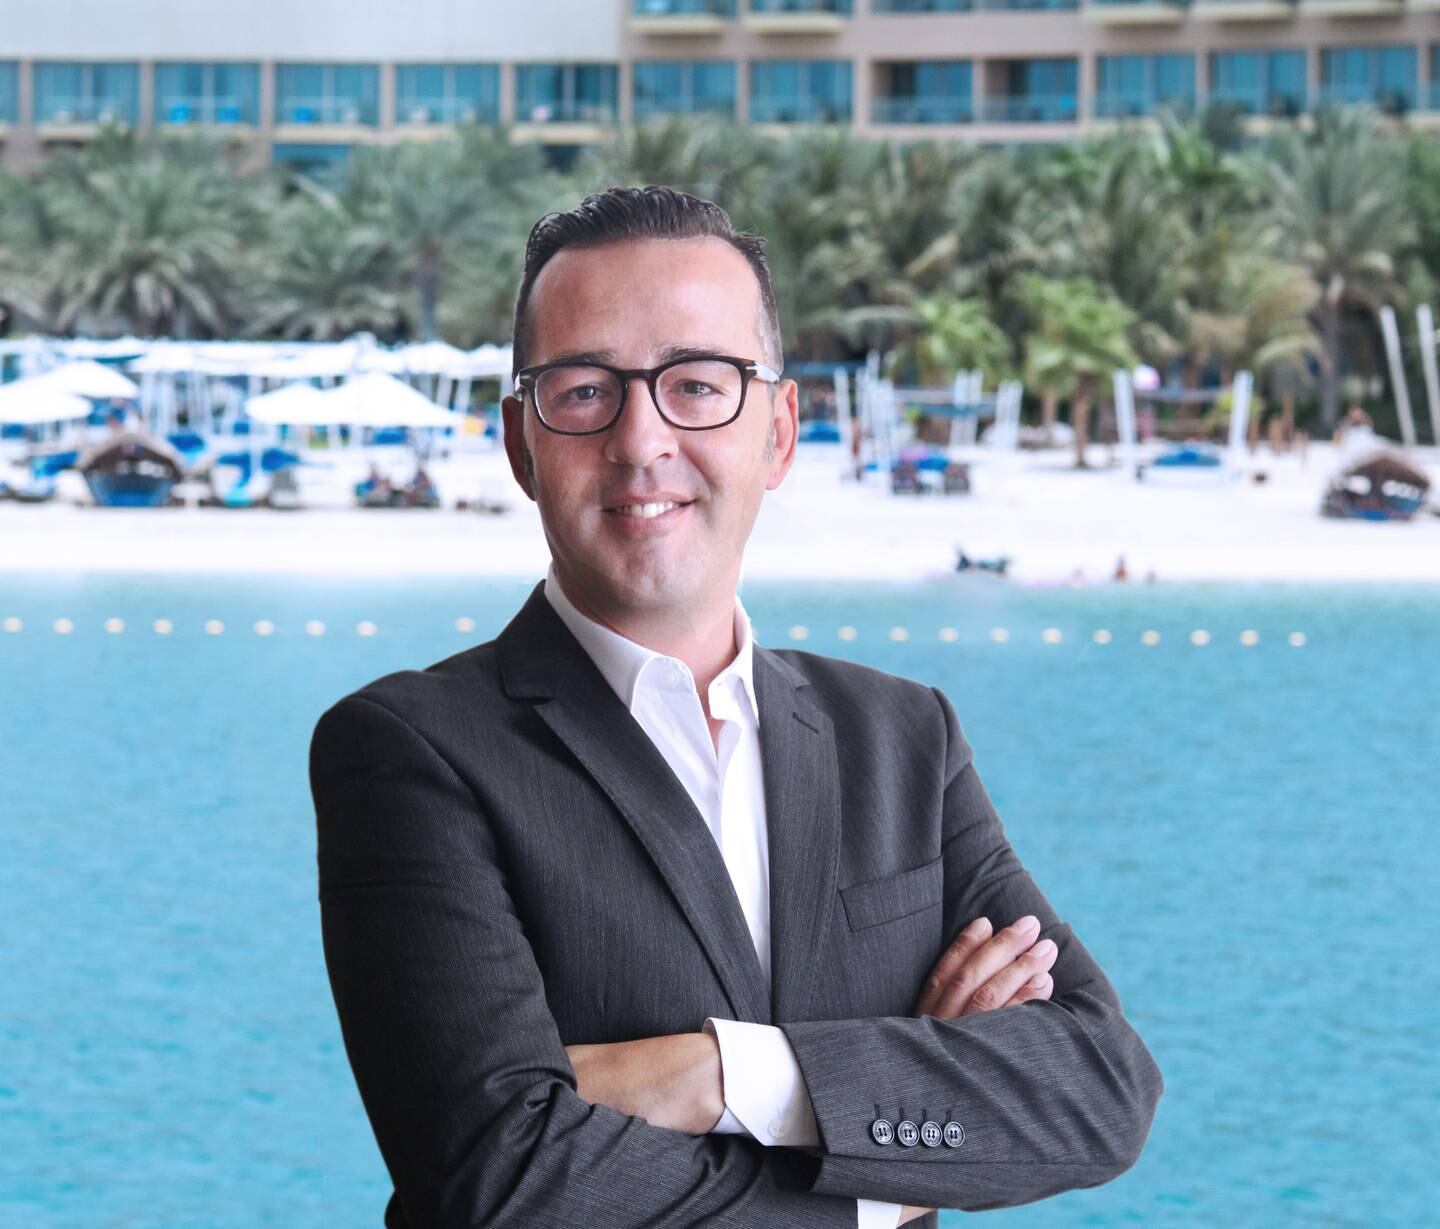 Murat Zorlu, general manager of Rixos The Palm Dubai Hotel & Suites, expects a high influx of visitors both local and international in the UAE during Eid Al Fitr. Photo: Rixos